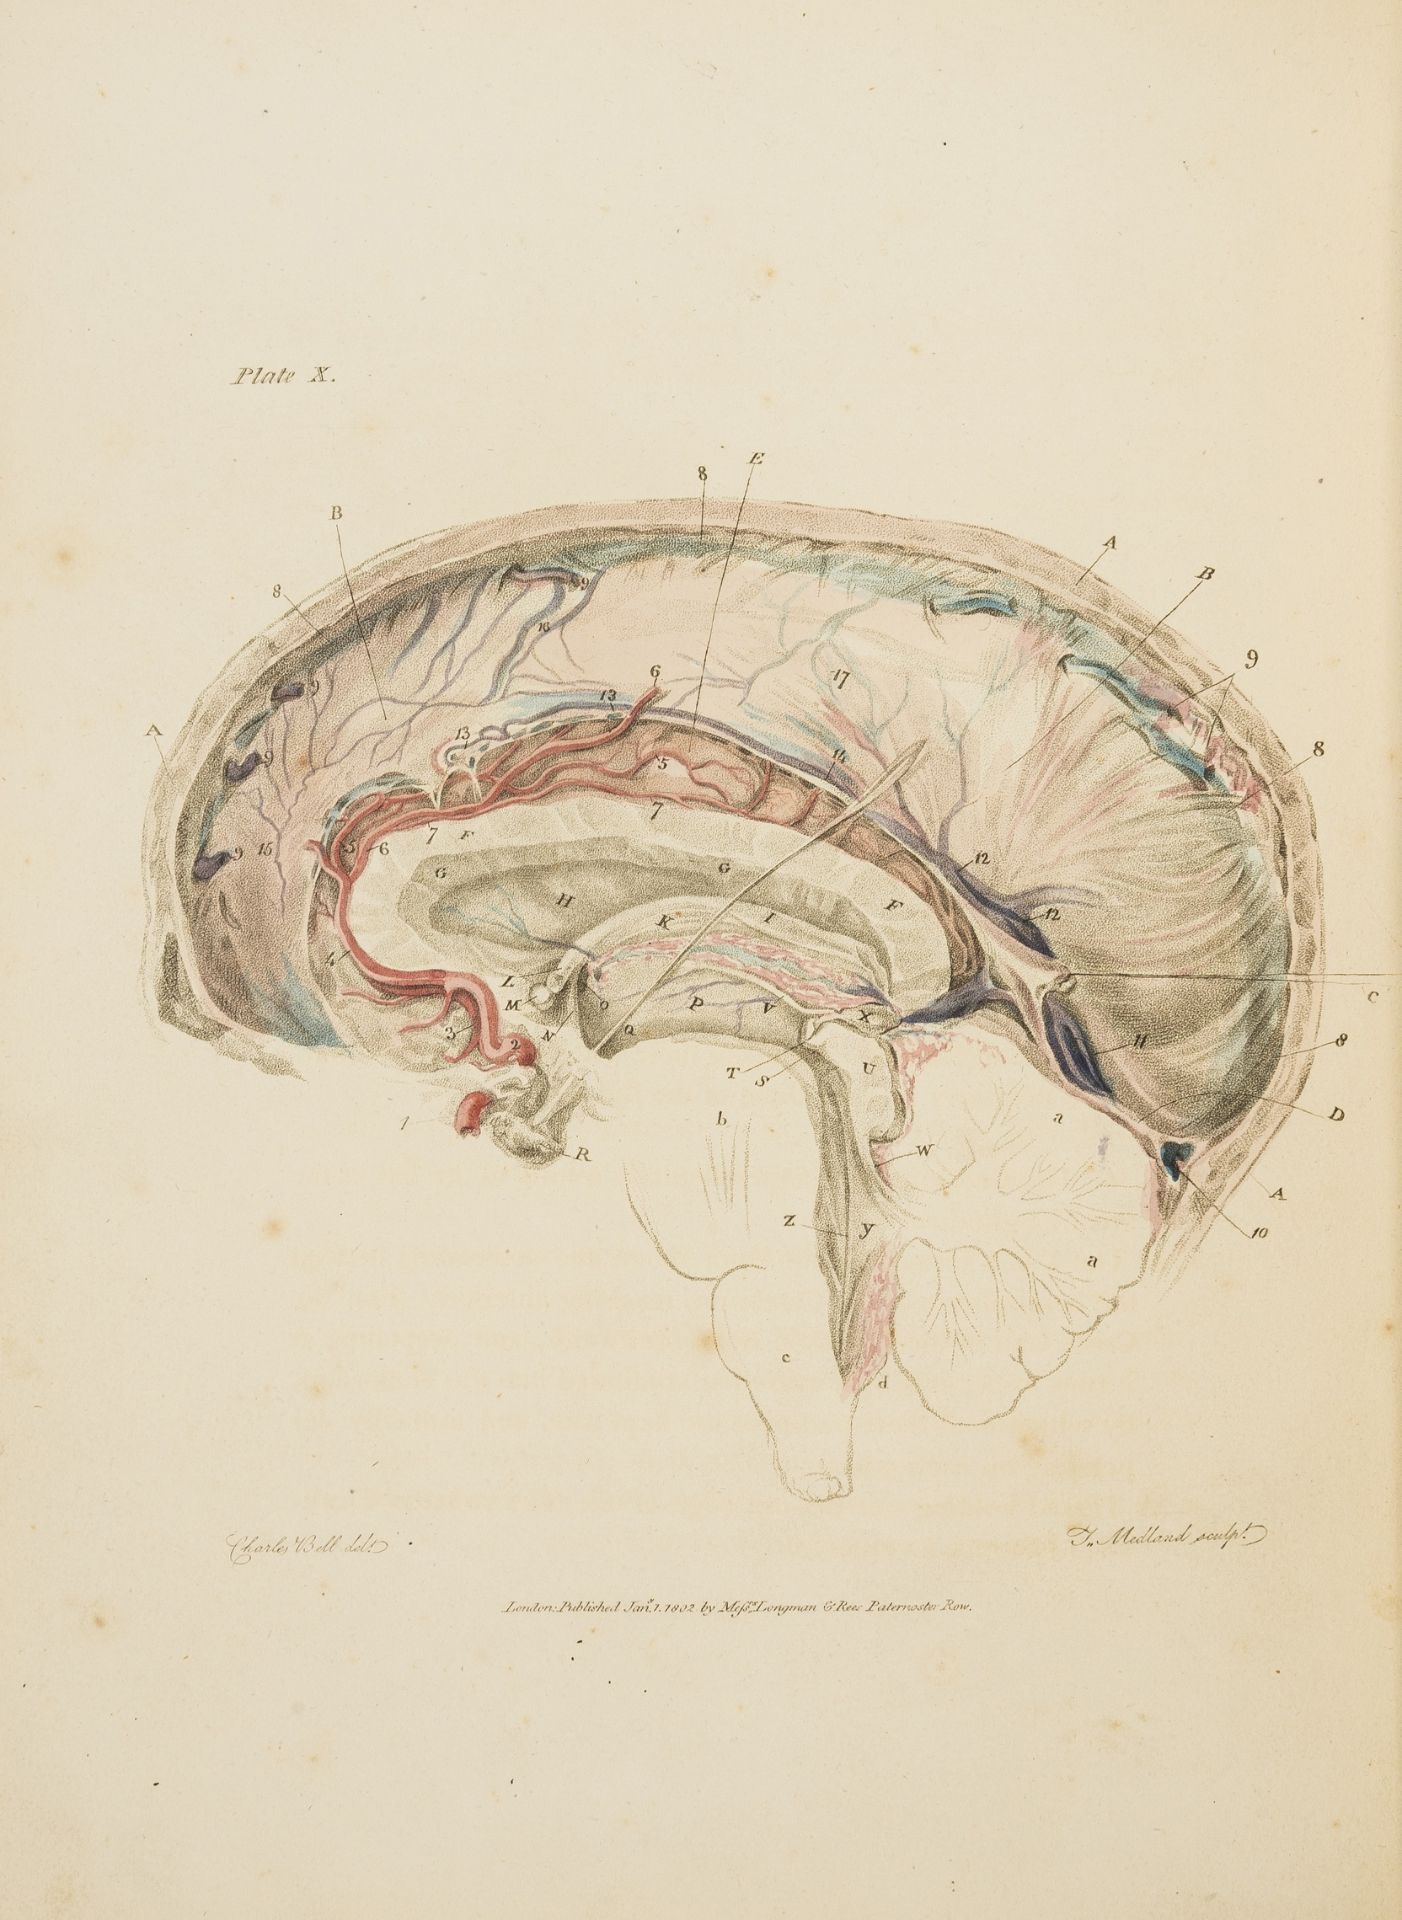 Medicine.- Bell (Sir Charles) The Anatomy of the Brain, first edition, 12 engraved plates, 1802.